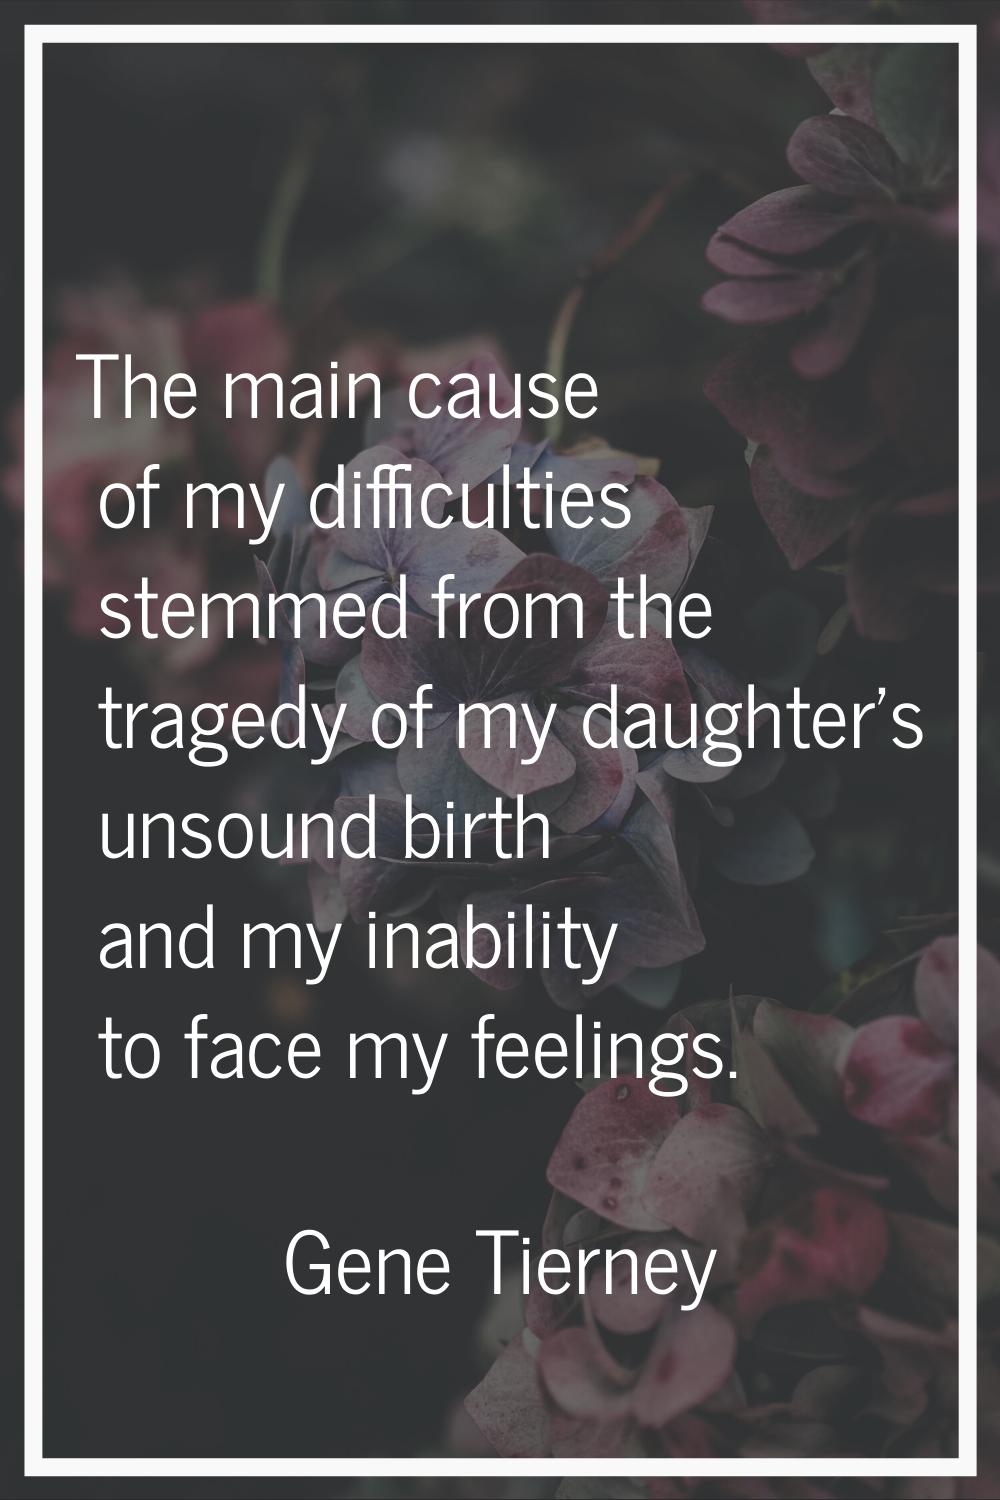 The main cause of my difficulties stemmed from the tragedy of my daughter's unsound birth and my in